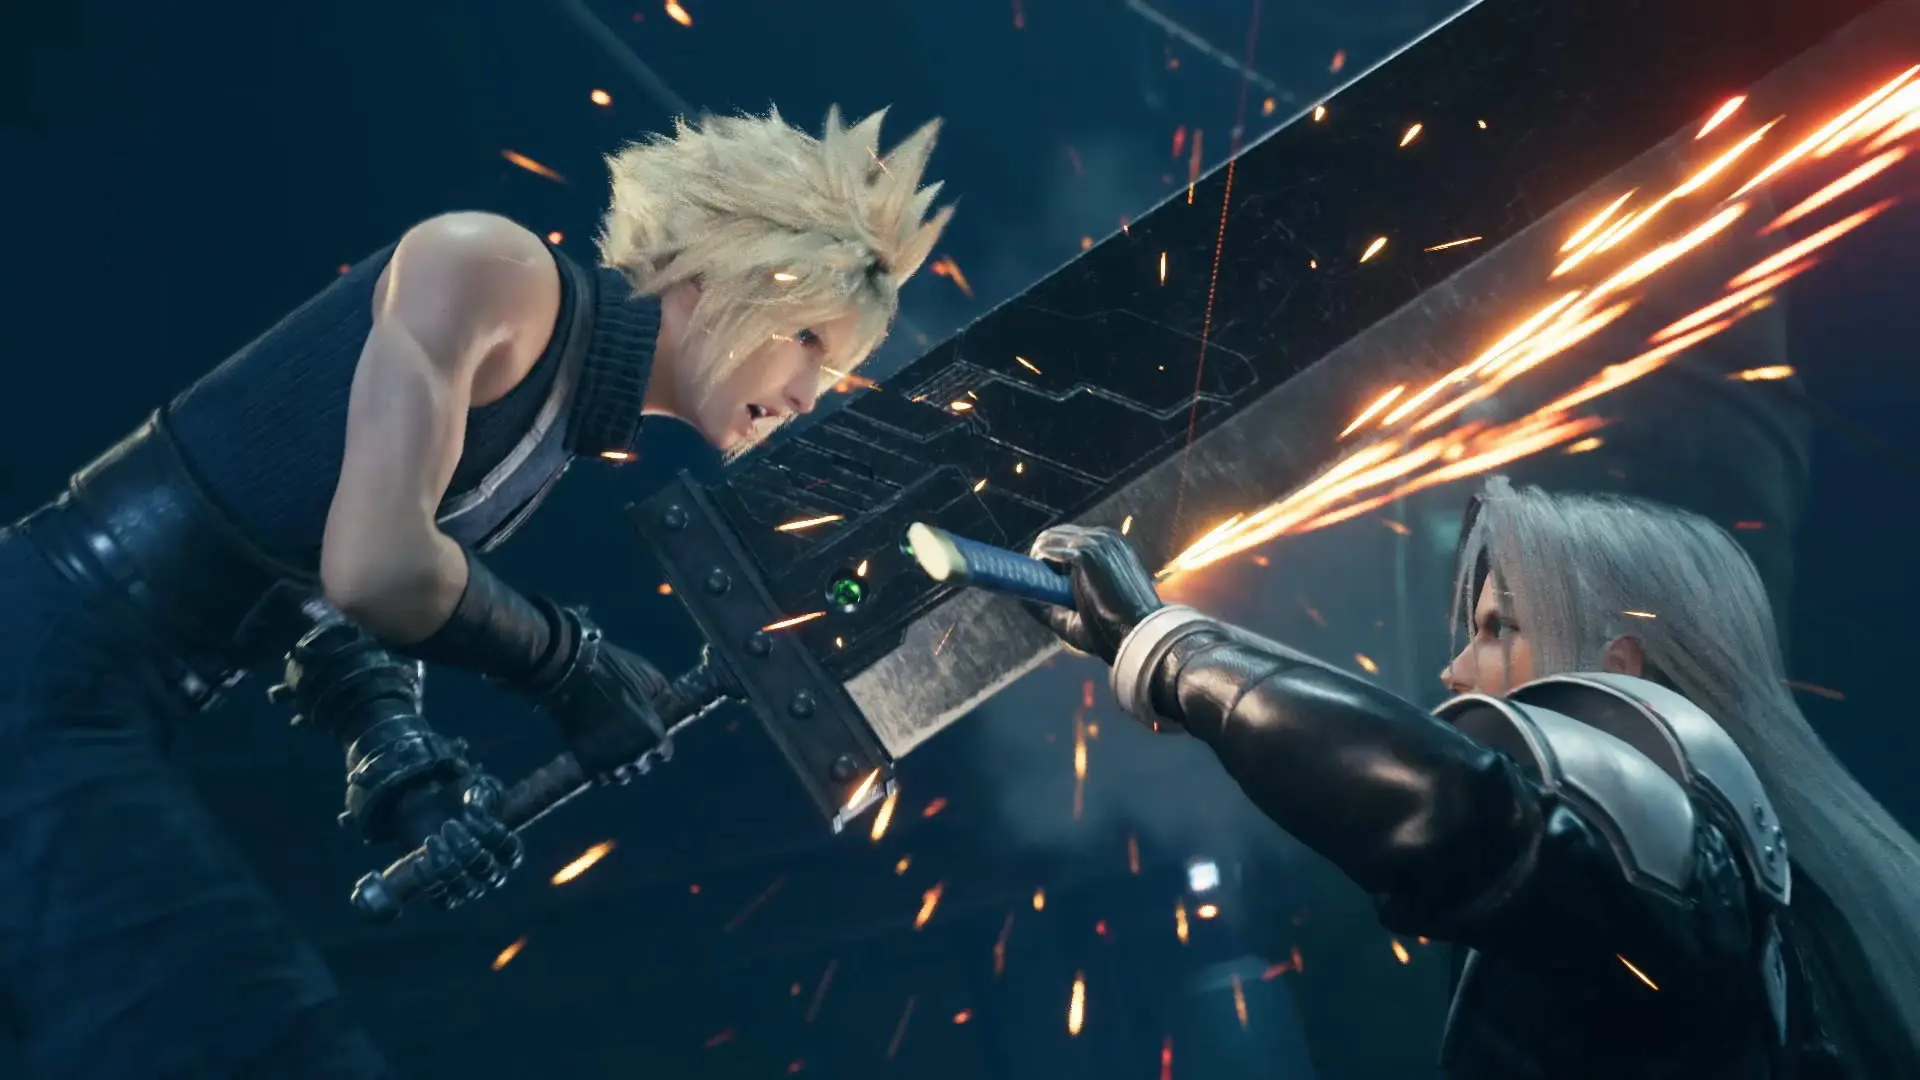 Final Fantasy 7 Remake demo is already available